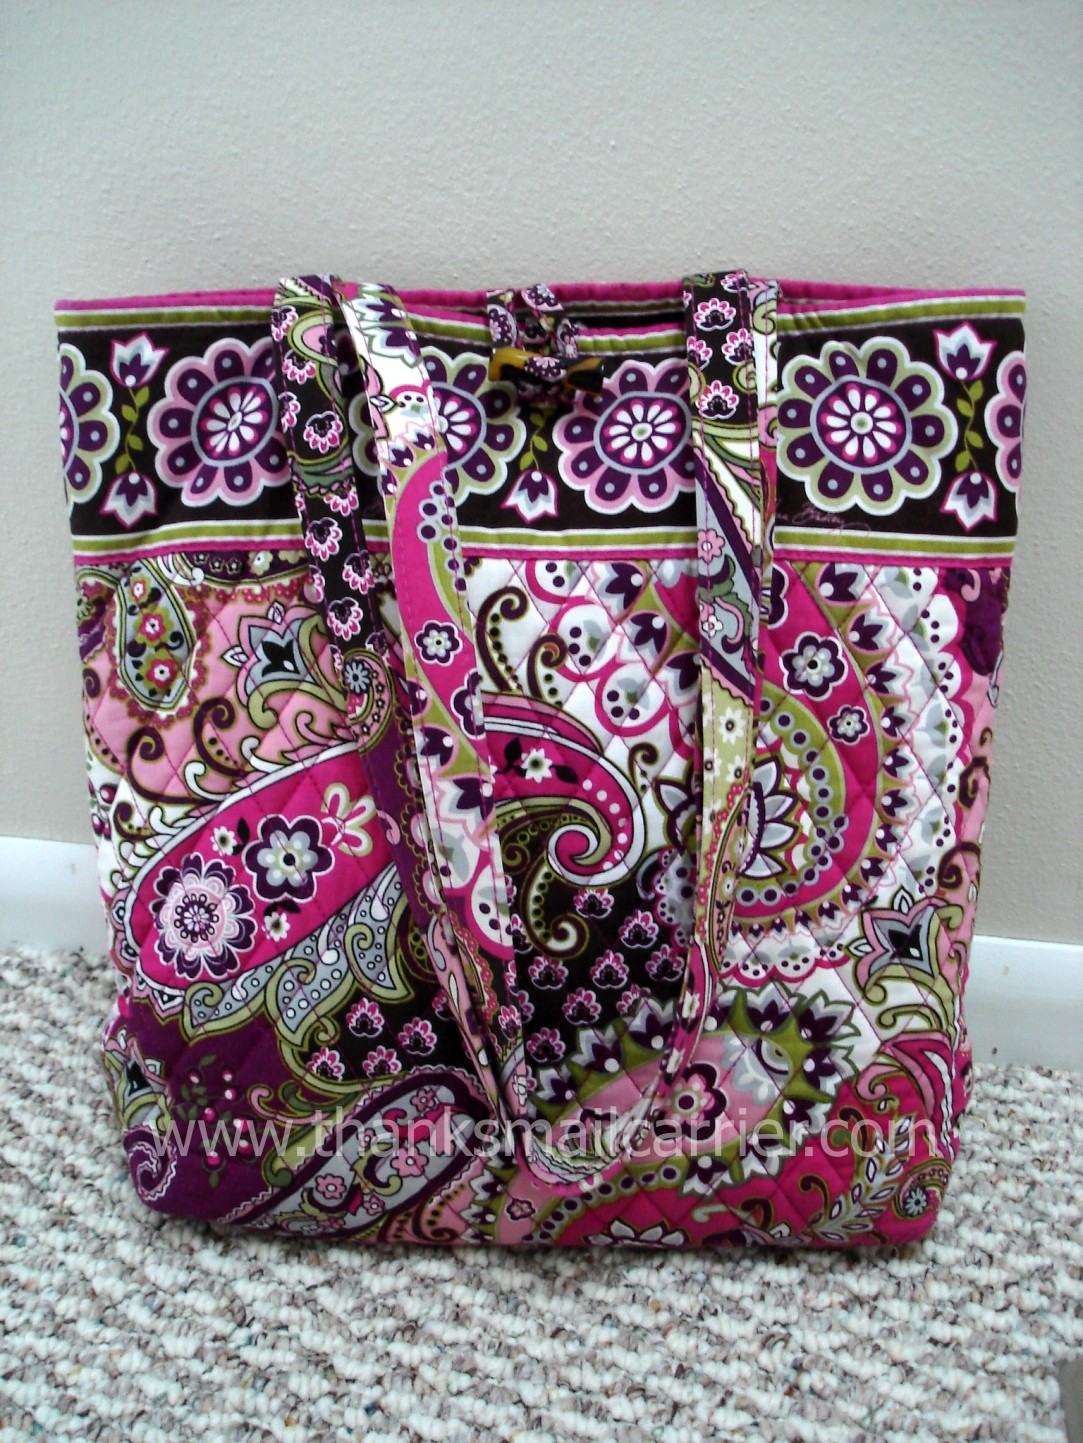 Vera Bradley Bags, Purses and More {Review}